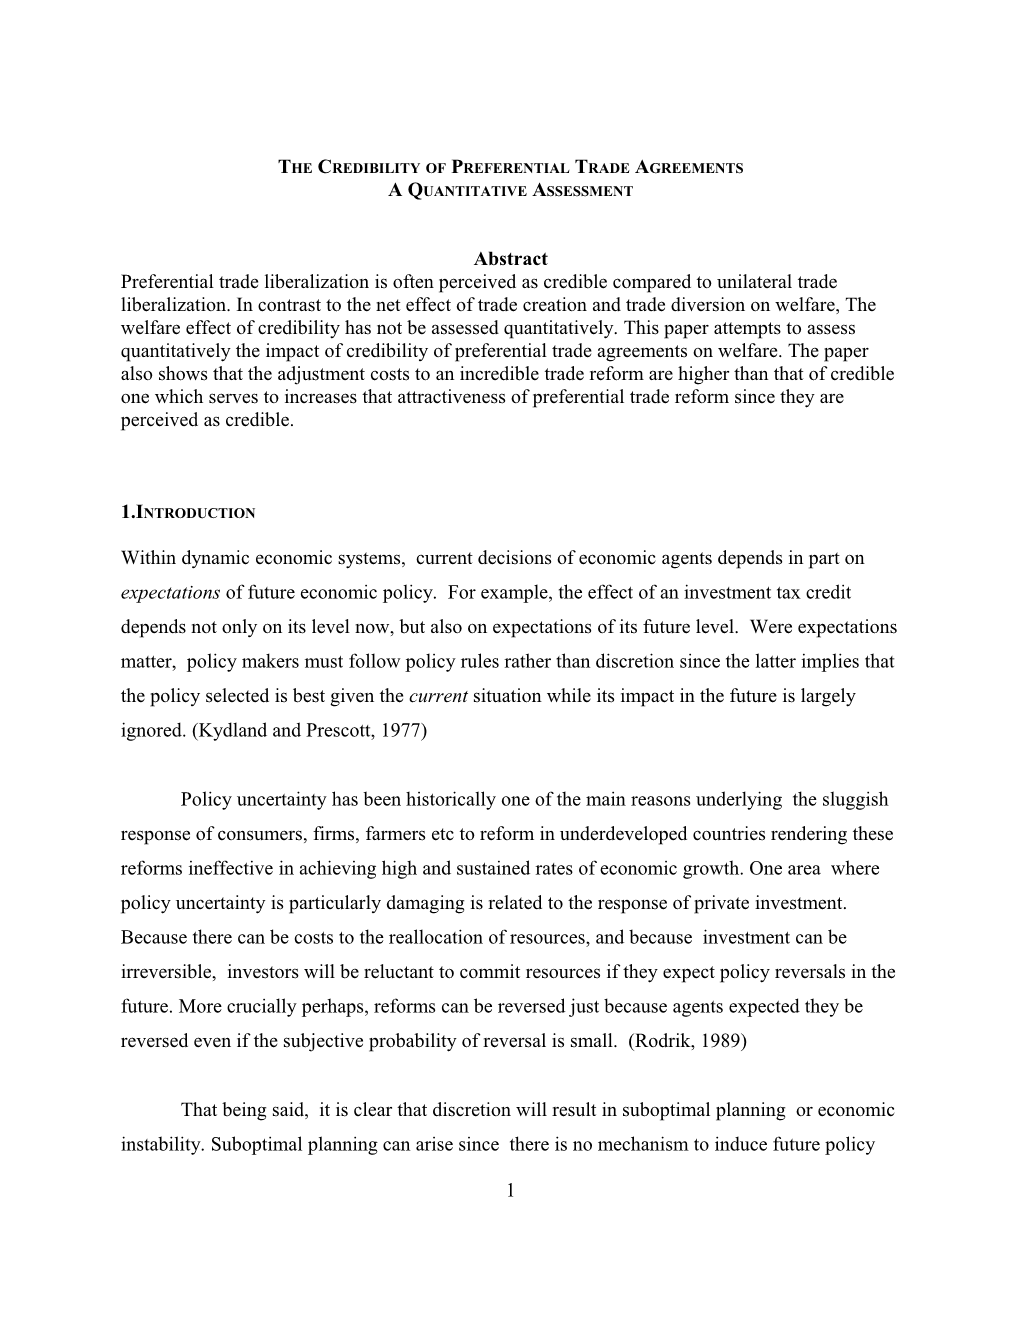 The Credibility of Preferential Trade Agreements: a Quantitative Assessment